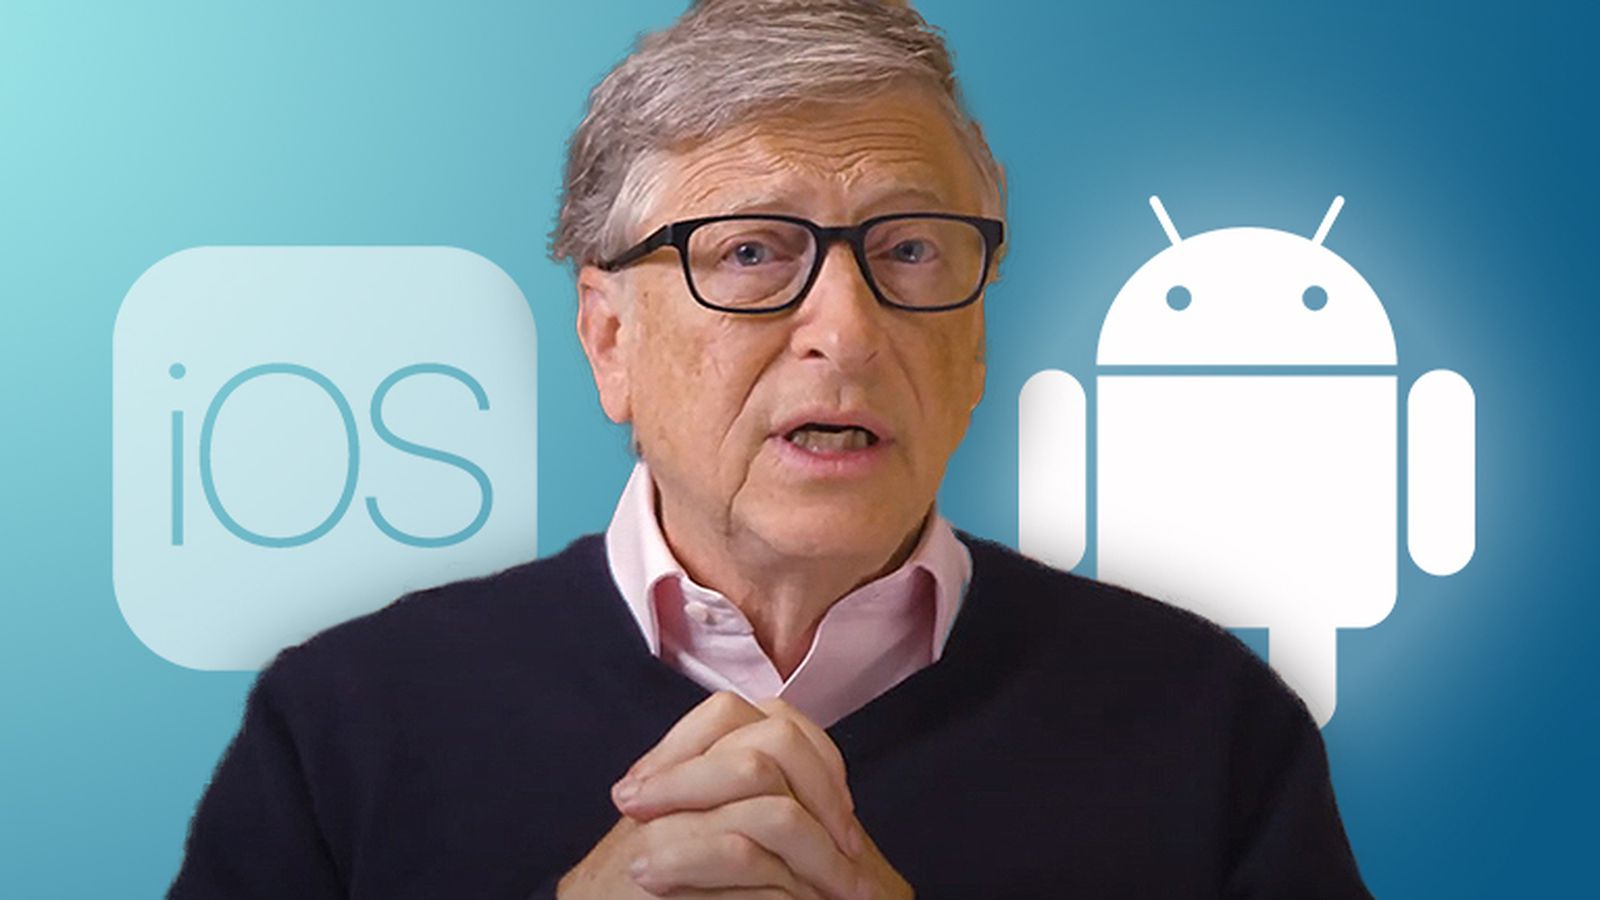 Bill Gates says his preference for Android over iPhone is due to pre-installed software